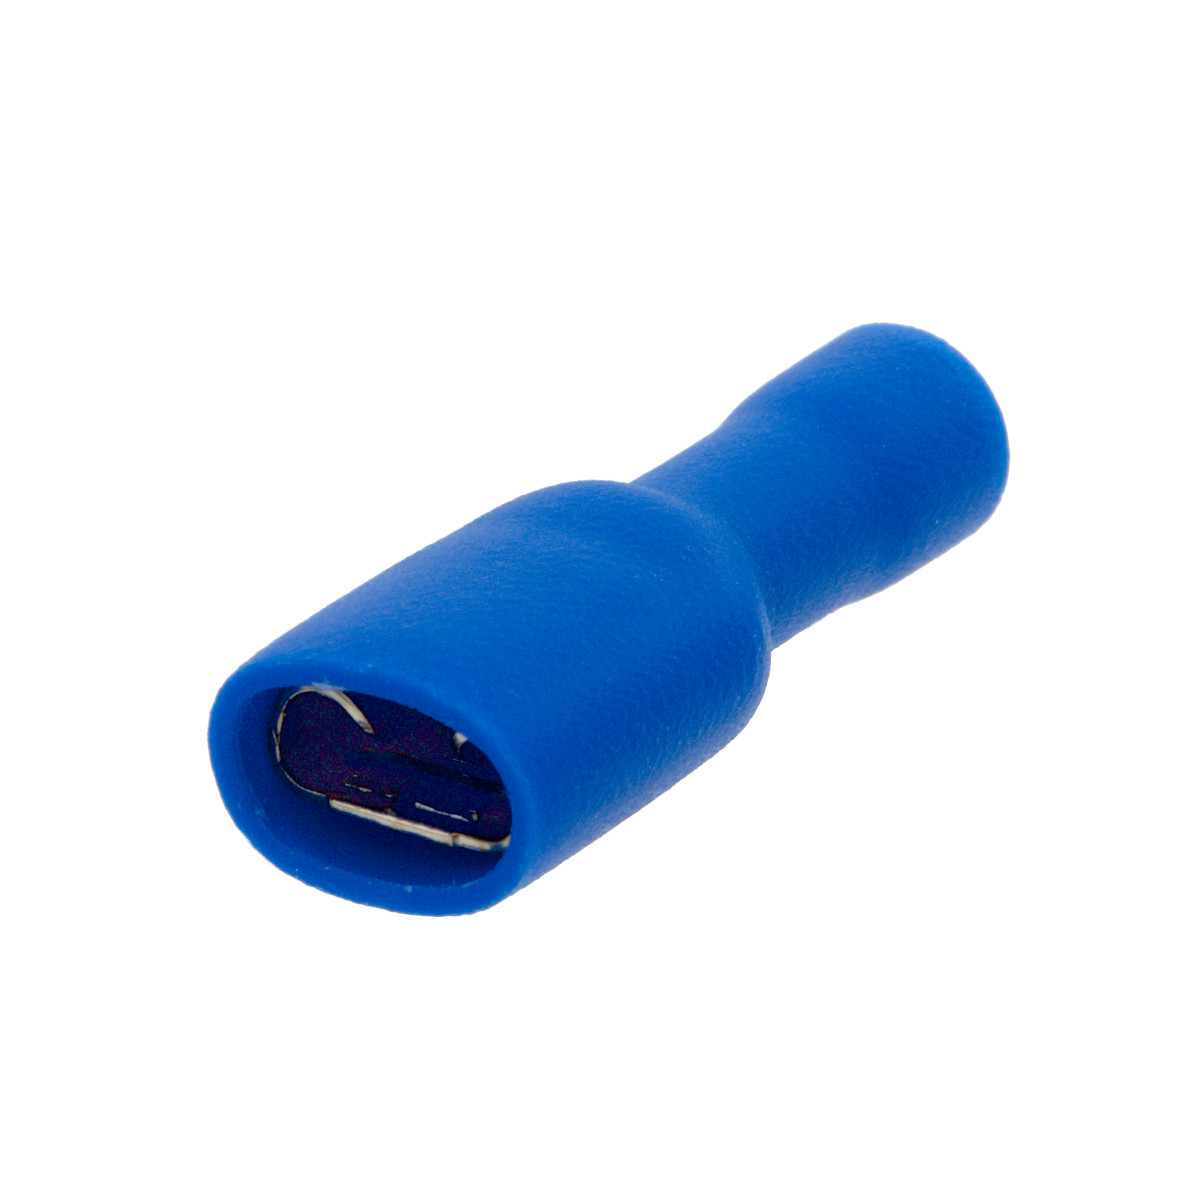 fully insulated FASTON female terminal 4.75mm 15A [100 units]